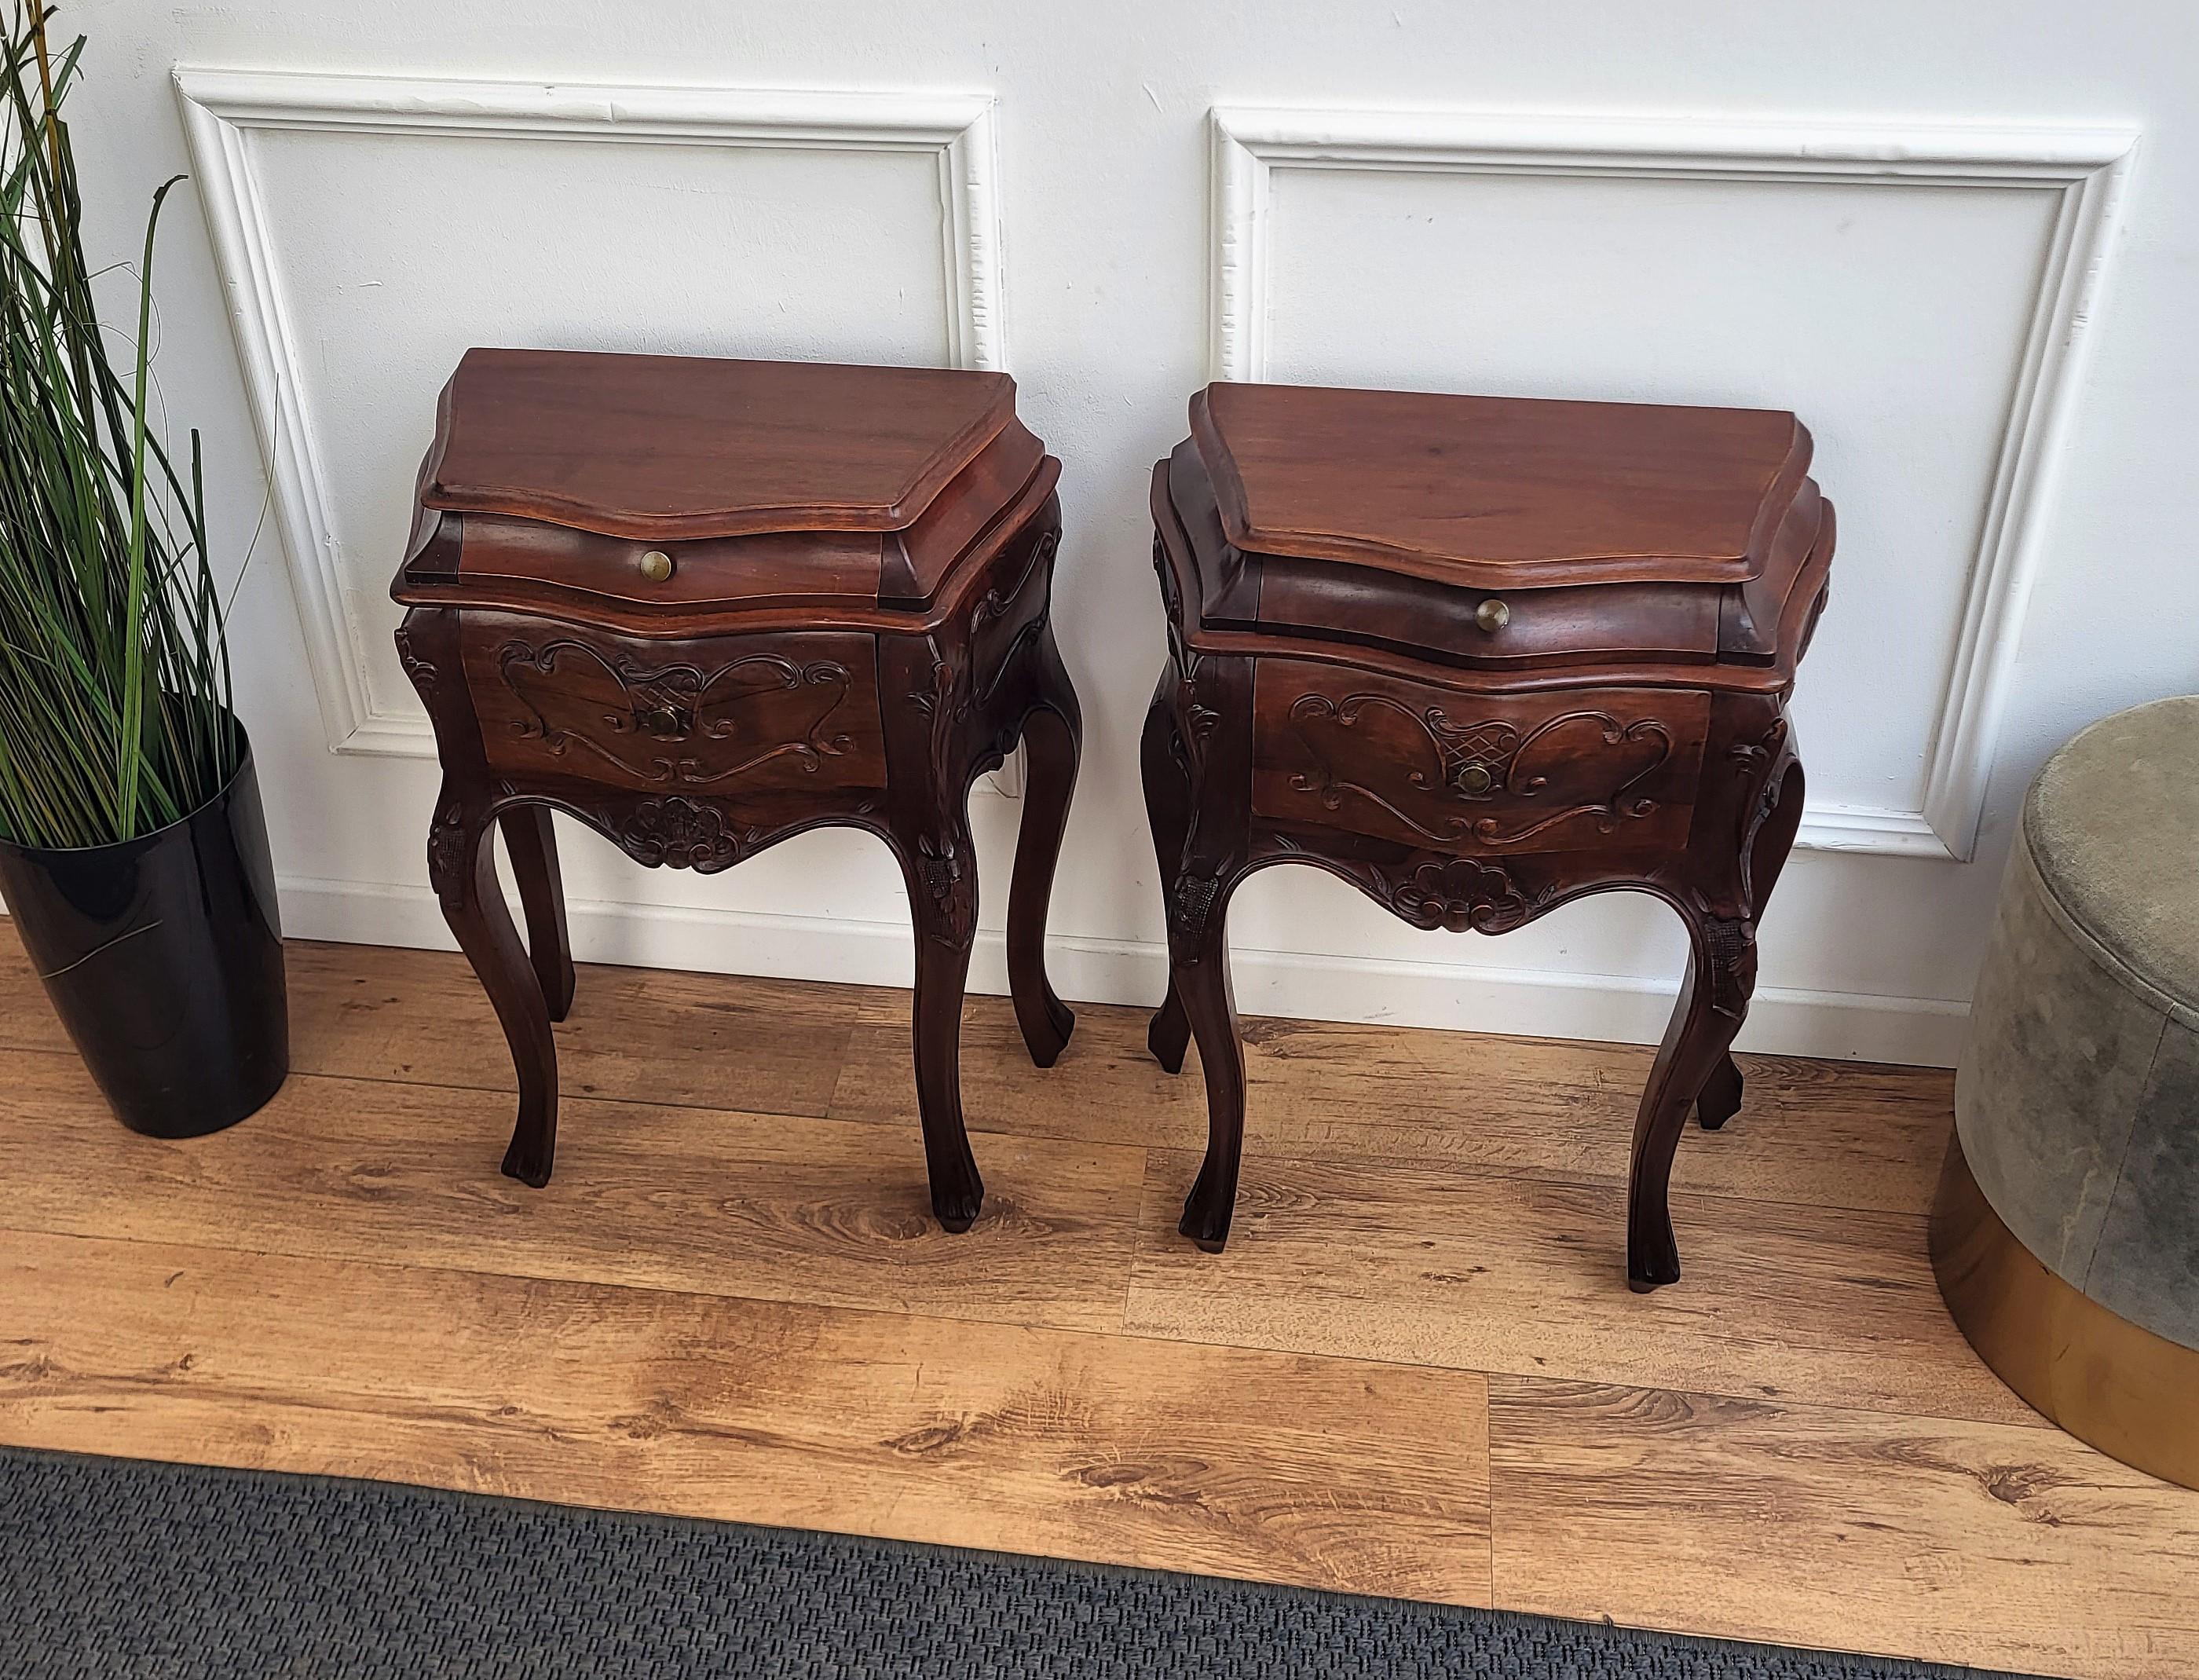 A pair of French carved decorated bedside tables night stands with two drawers.